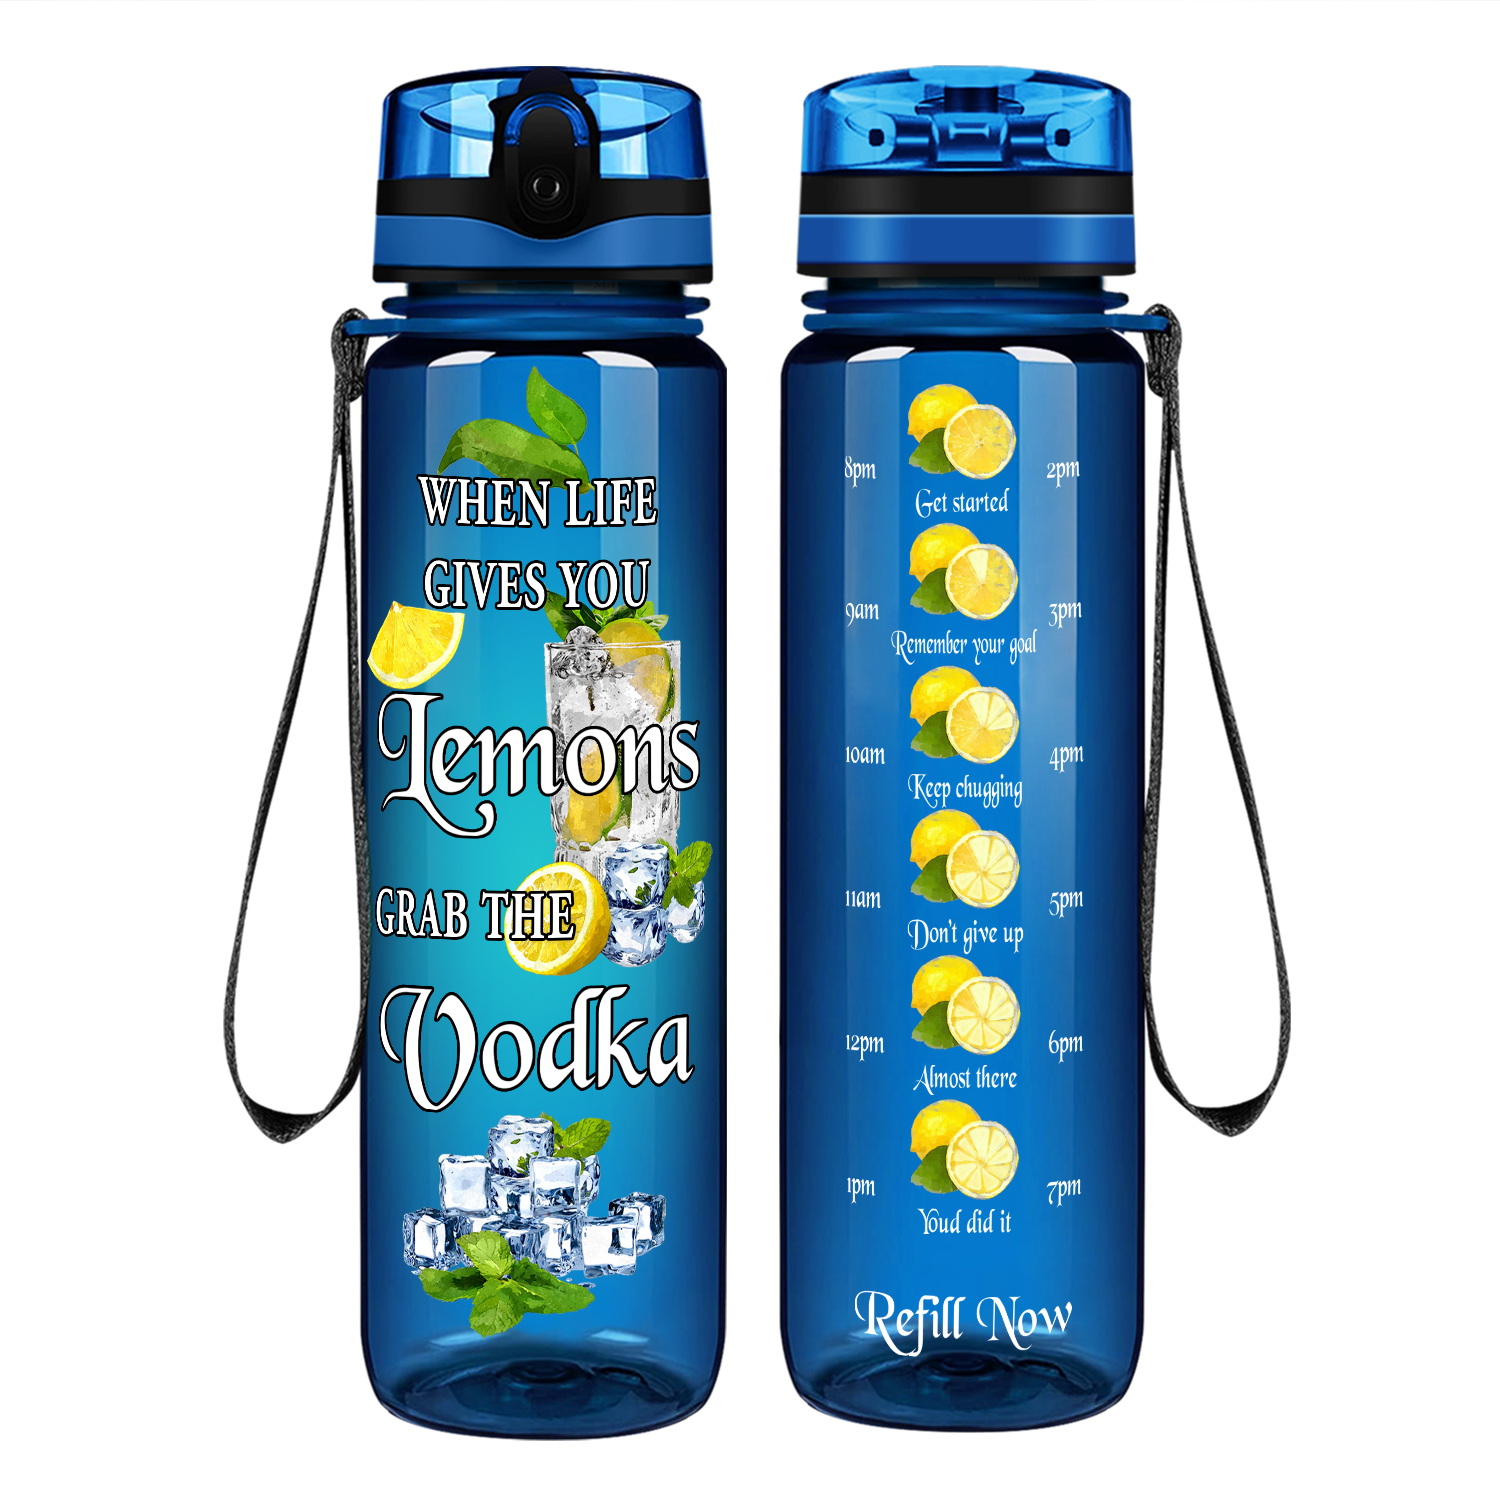 When Life Gives You Lemons Grab the Vodka Ice on 32 oz Motivational Tracking Water Bottle